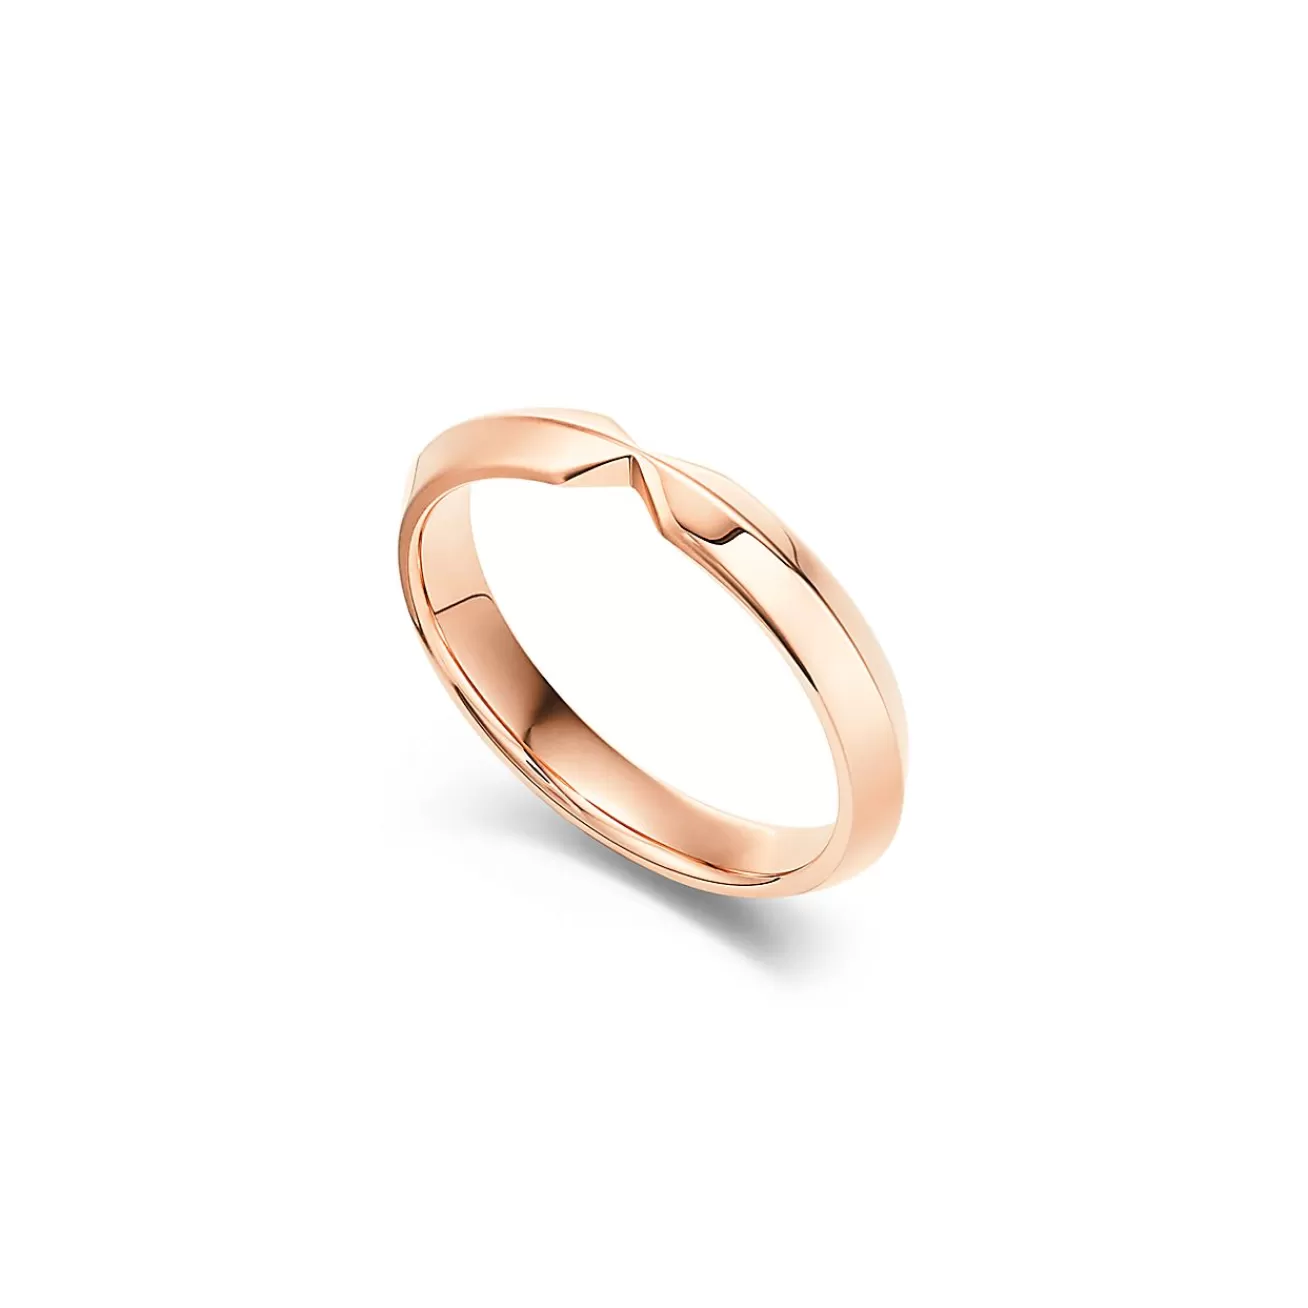 Tiffany & Co. The Tiffany® Setting nesting narrow band ring in 18k rose gold, 3 mm wide. | ^Women Rings | Stacking Rings